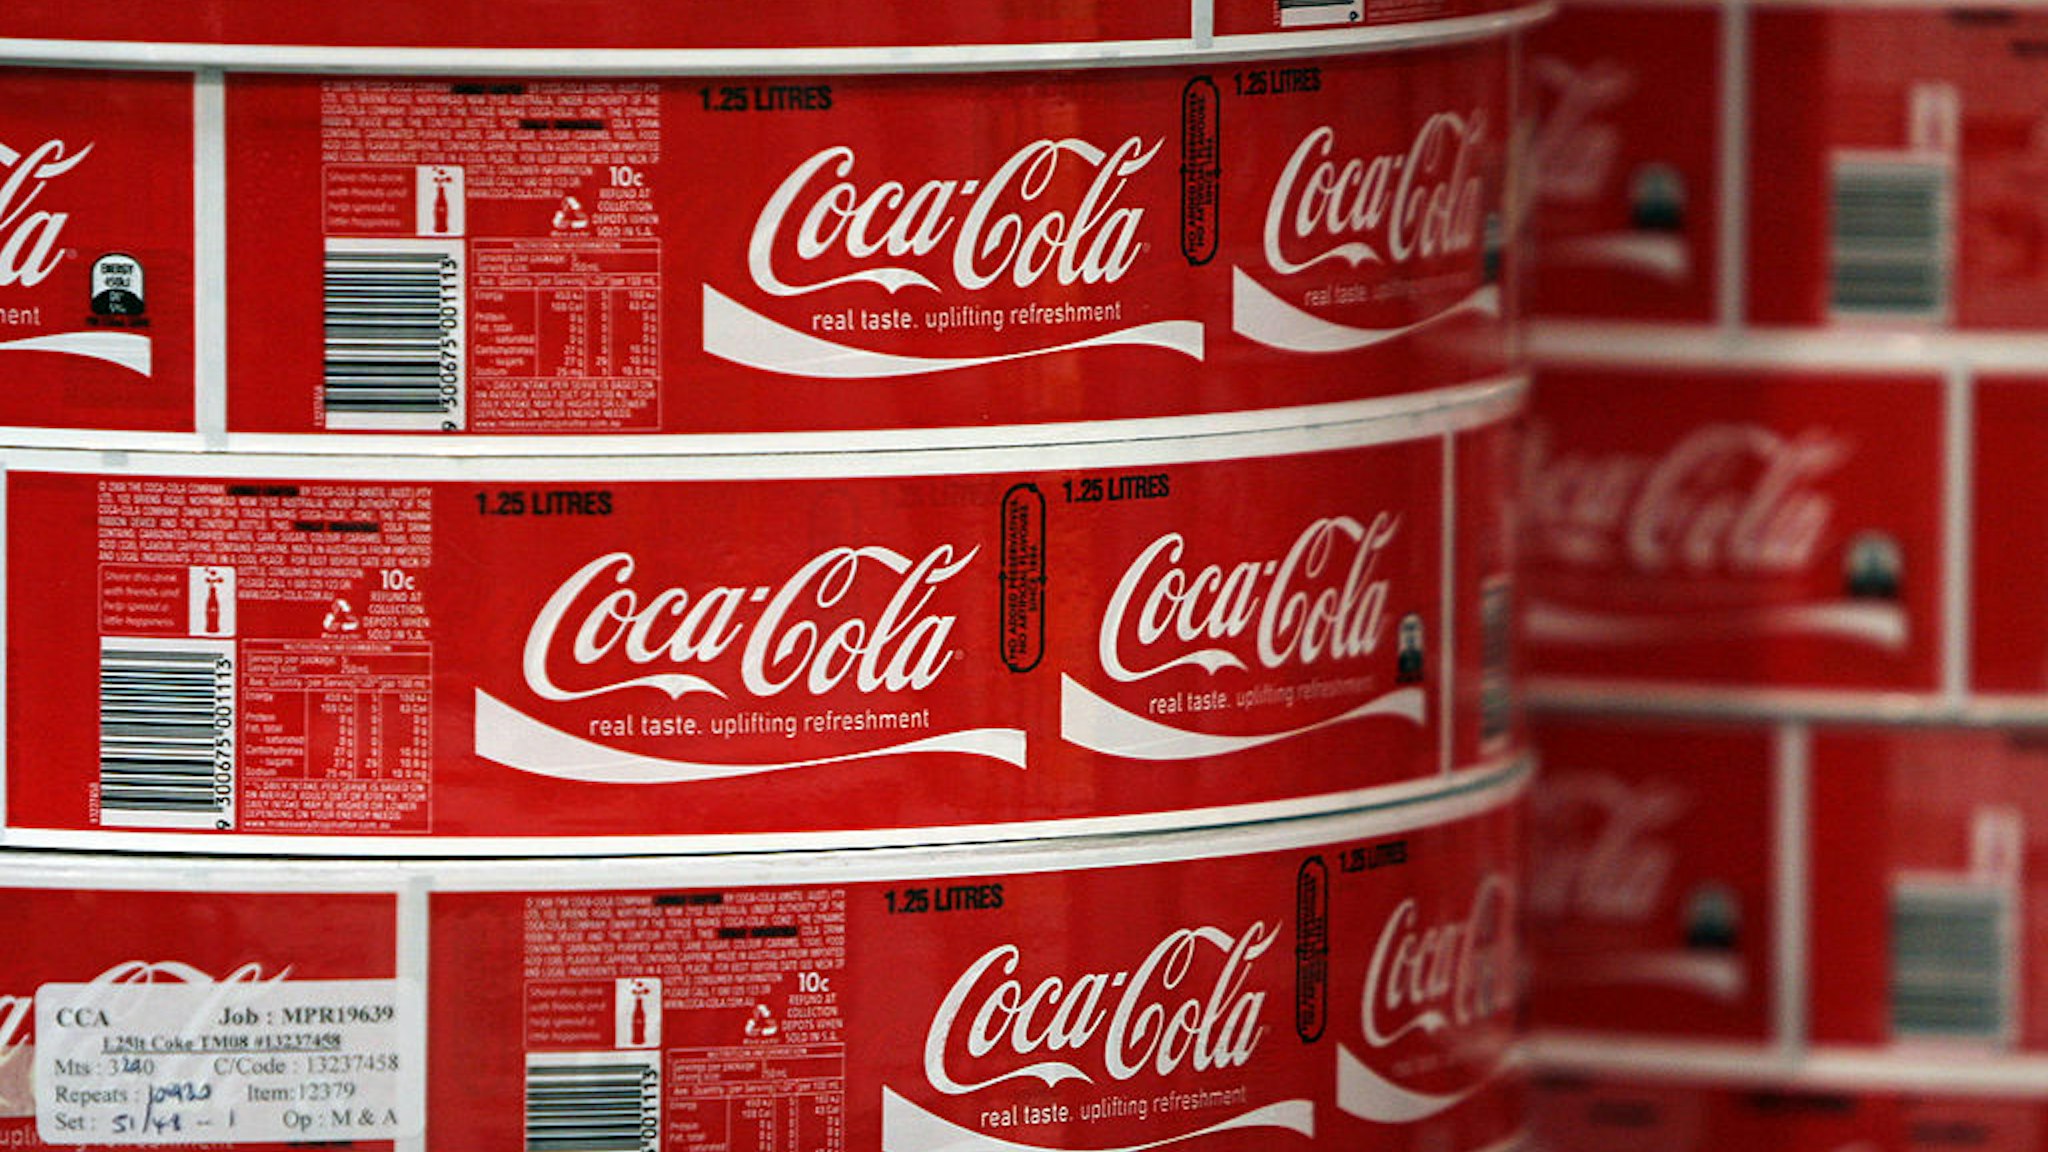 AUSTRALIA - APRIL 30: Labels for bottles of Coca-Cola soft-drink are stacked at the Coca-Cola Amatil Ltd. bottling plant in Sydney, Australia, on Thursday, April 30, 2009. Coca- Cola Amatil Ltd. is Australia's biggest soft-drink maker. (Photo by Ian Waldie/Bloomberg via Getty Images)